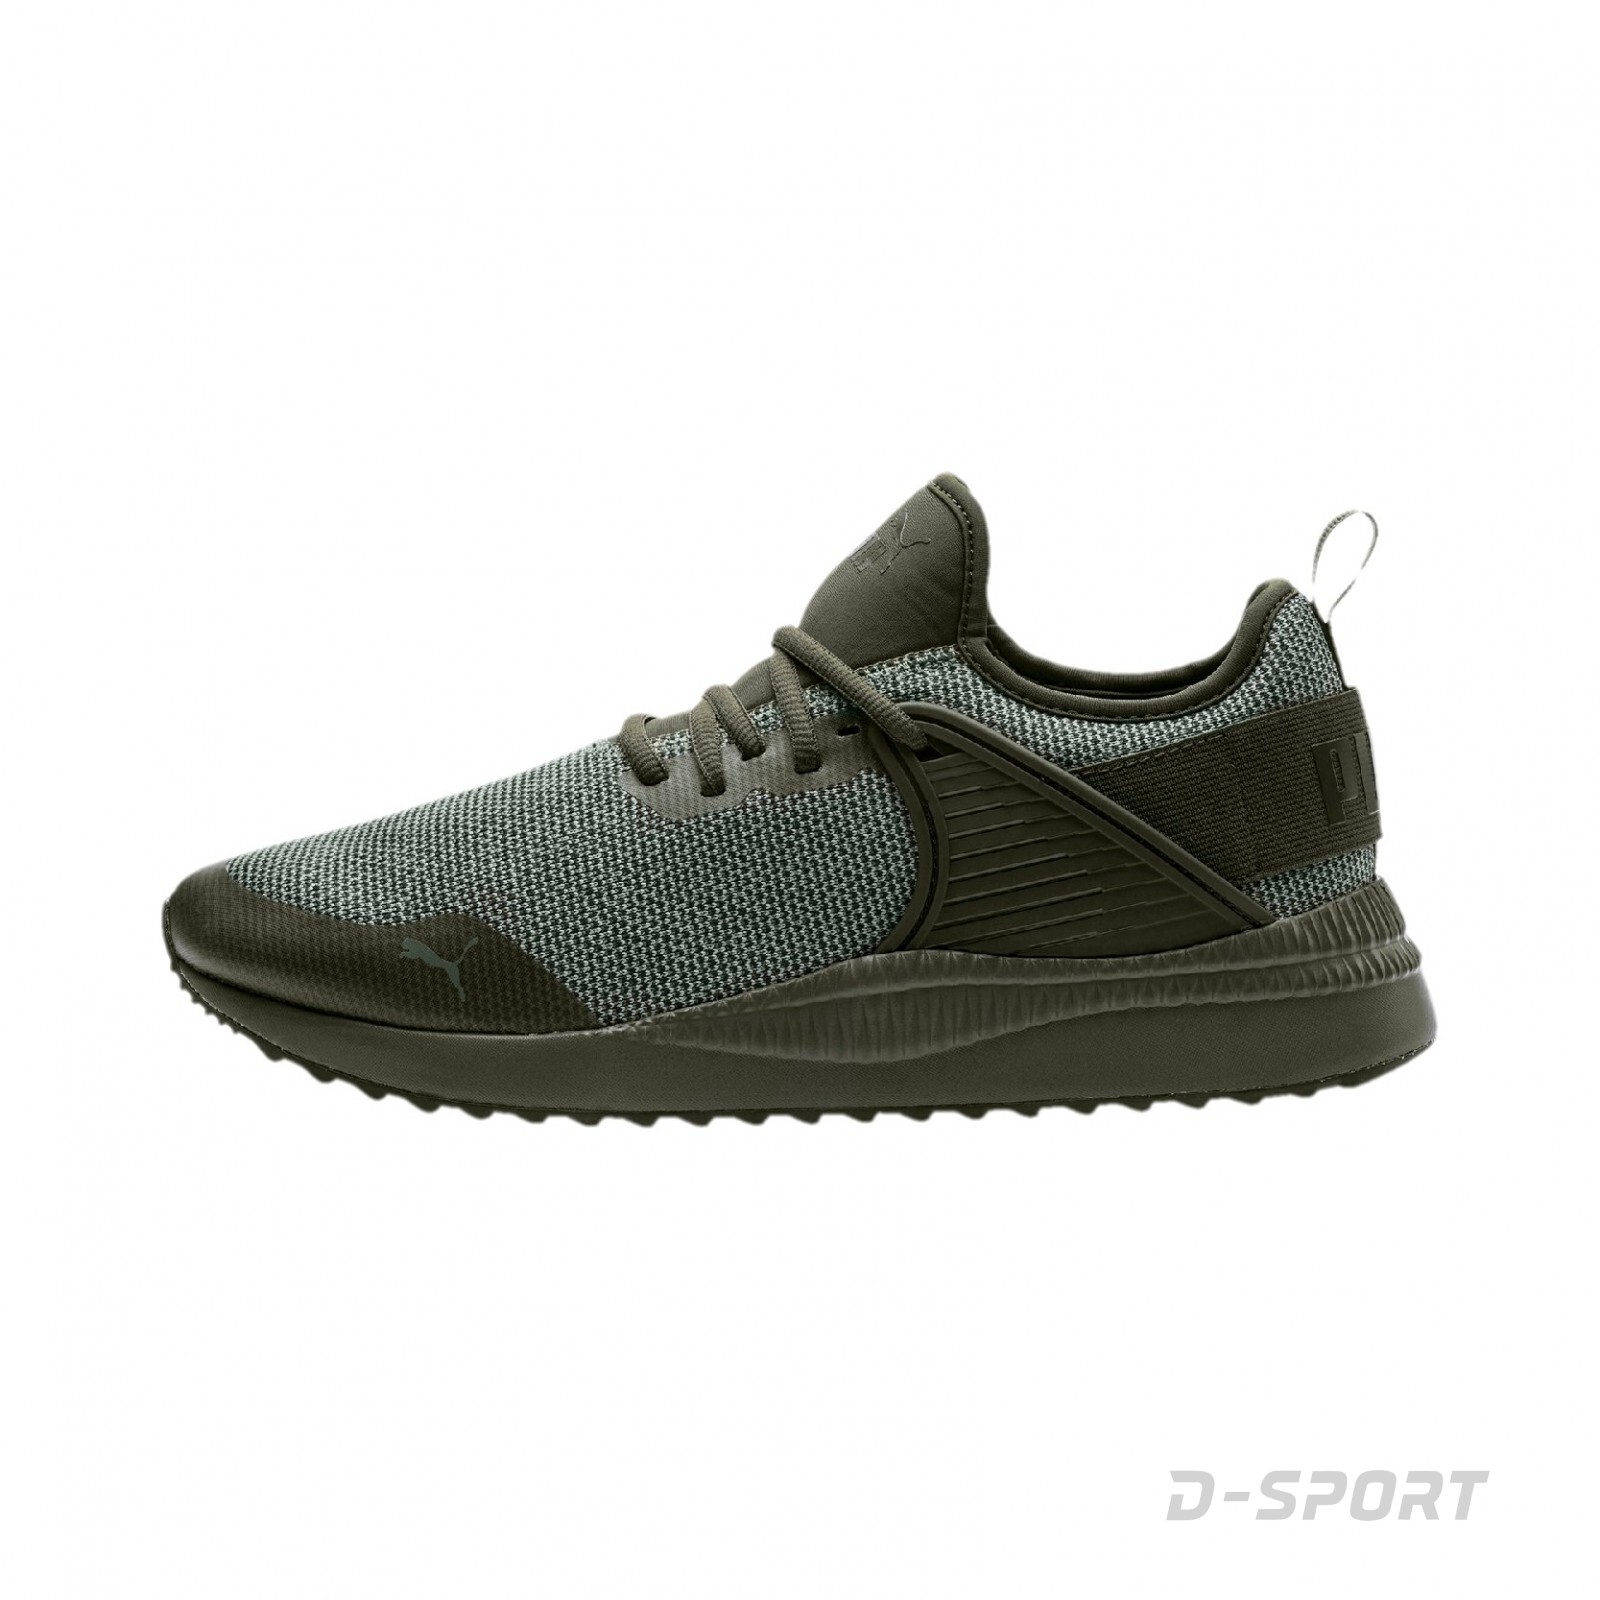 Puma Pacer Next Cage Knit Forest Ni